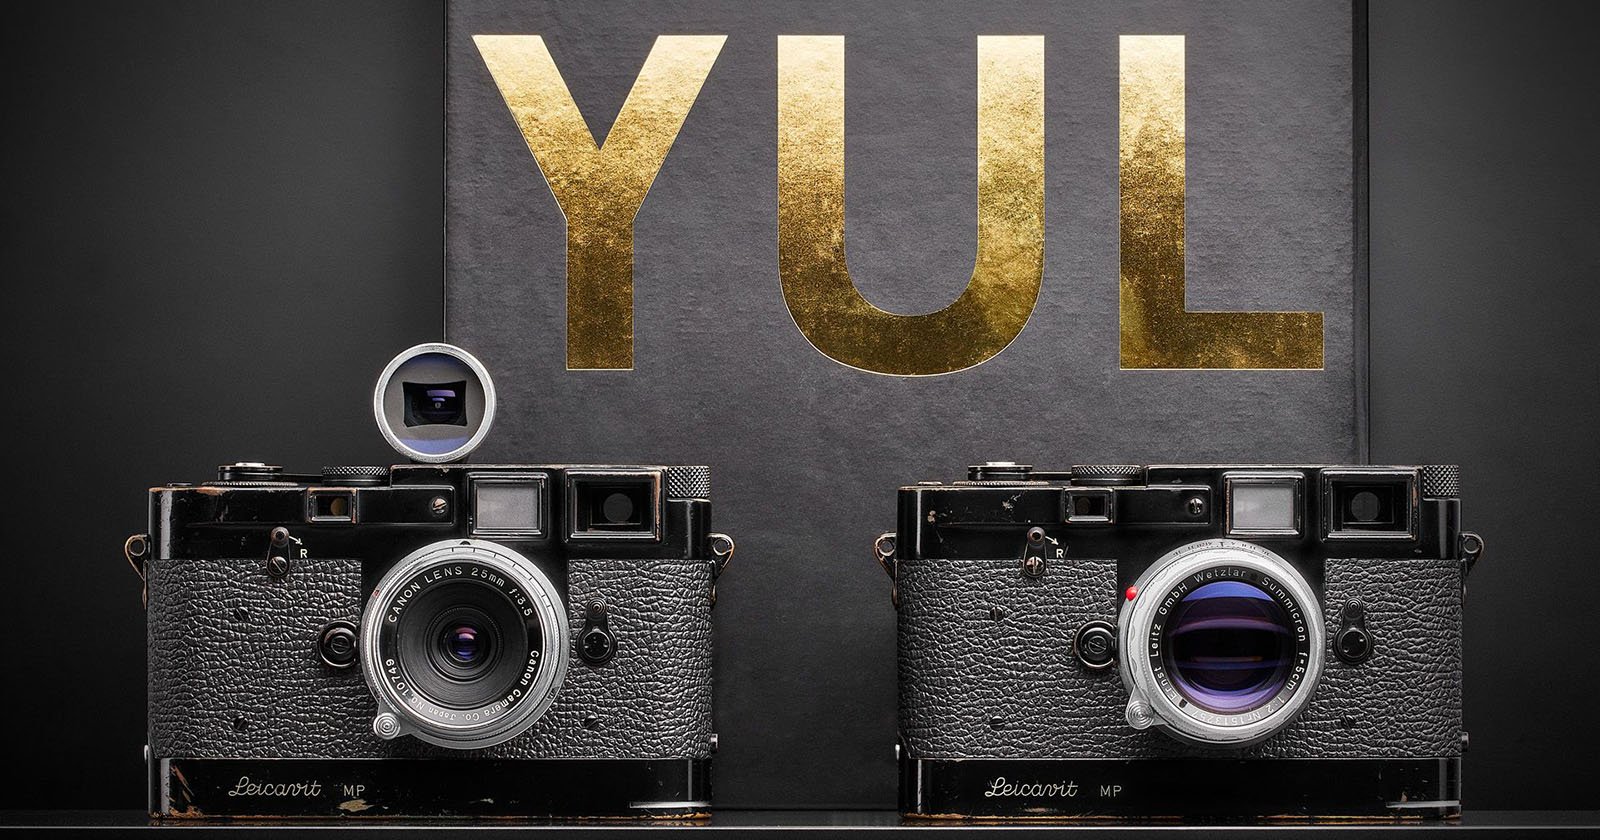  yul brynner leica cameras sell more than 